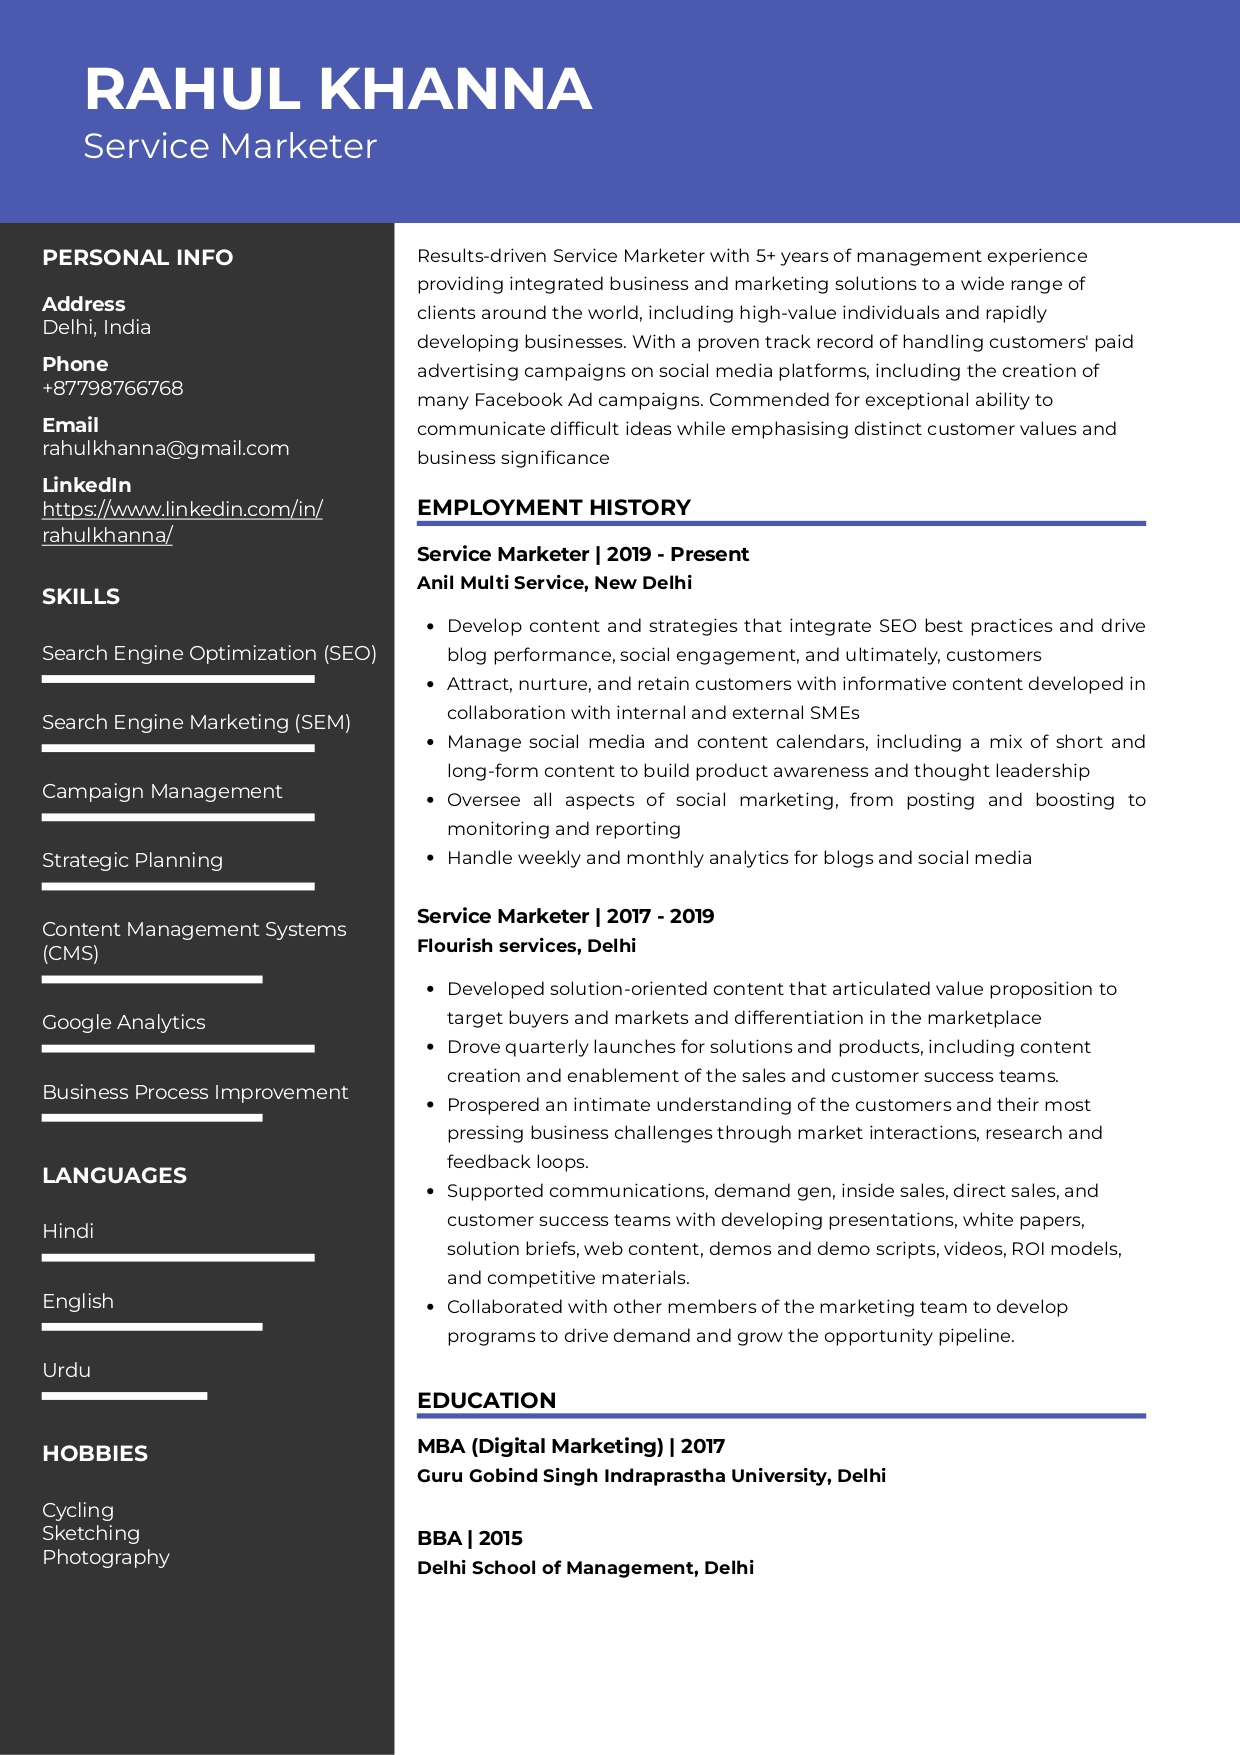 Resume of Service Marketer